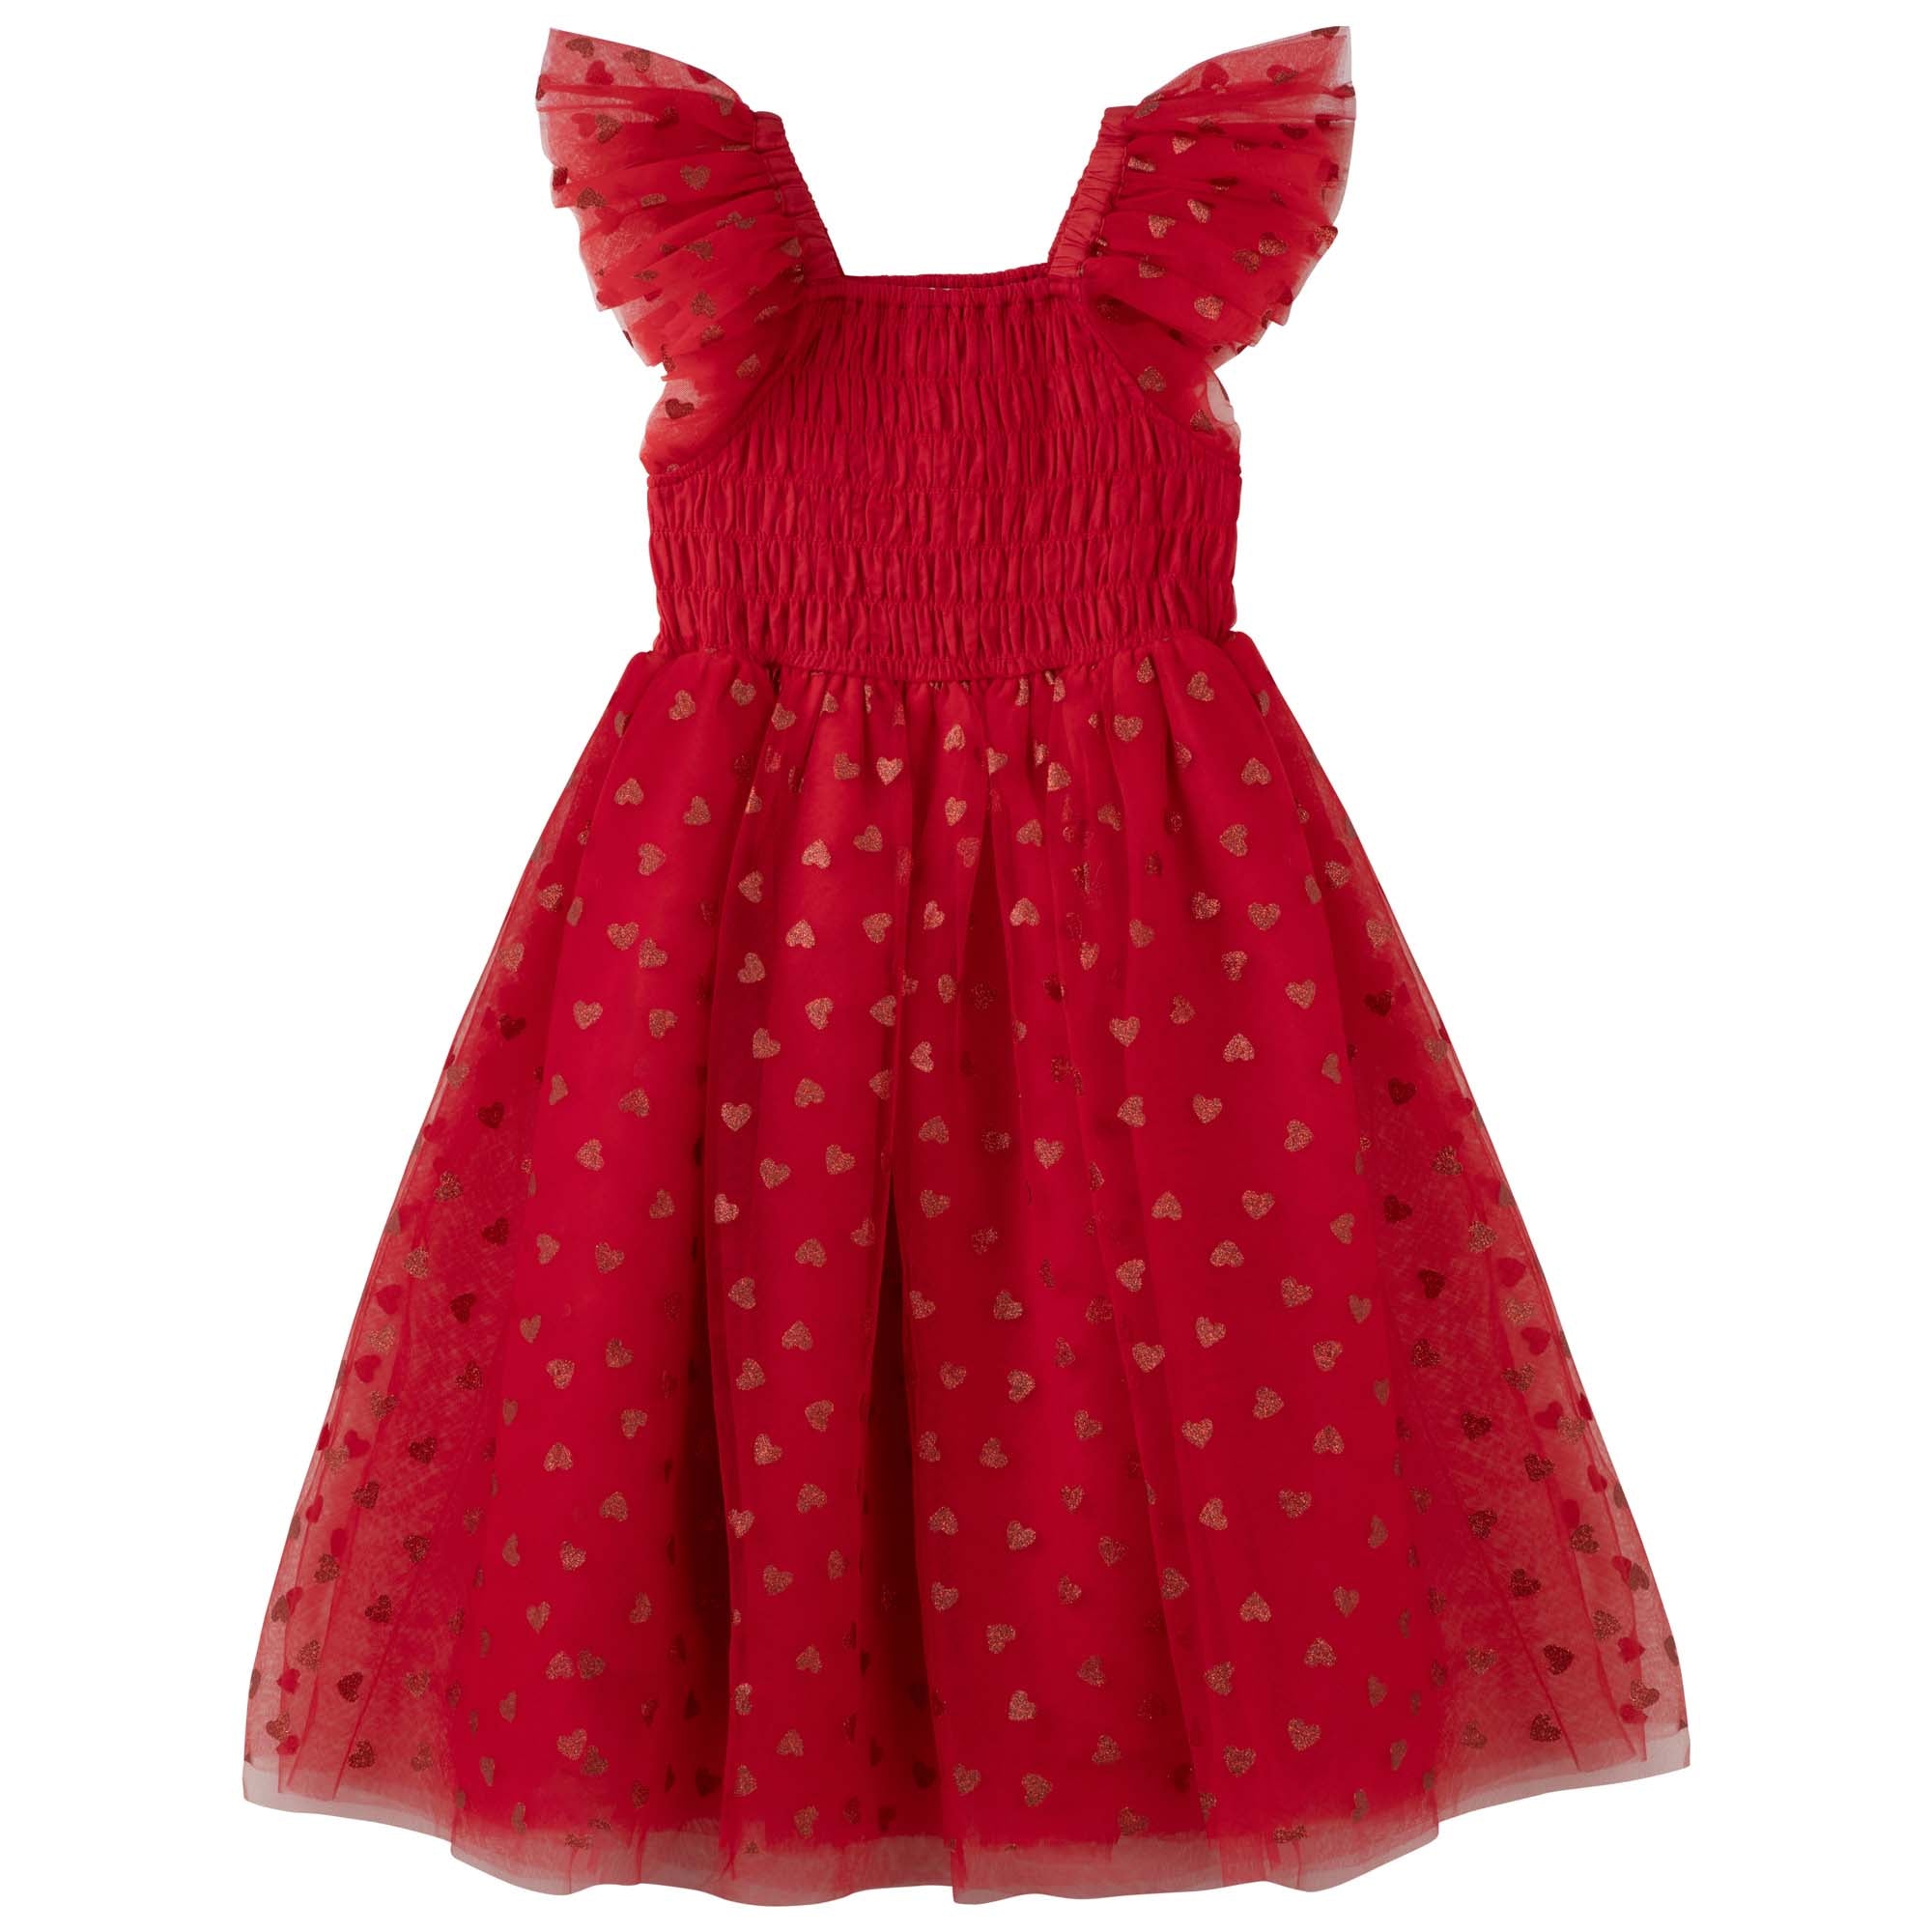 From The Heart Tulle Dress - Red